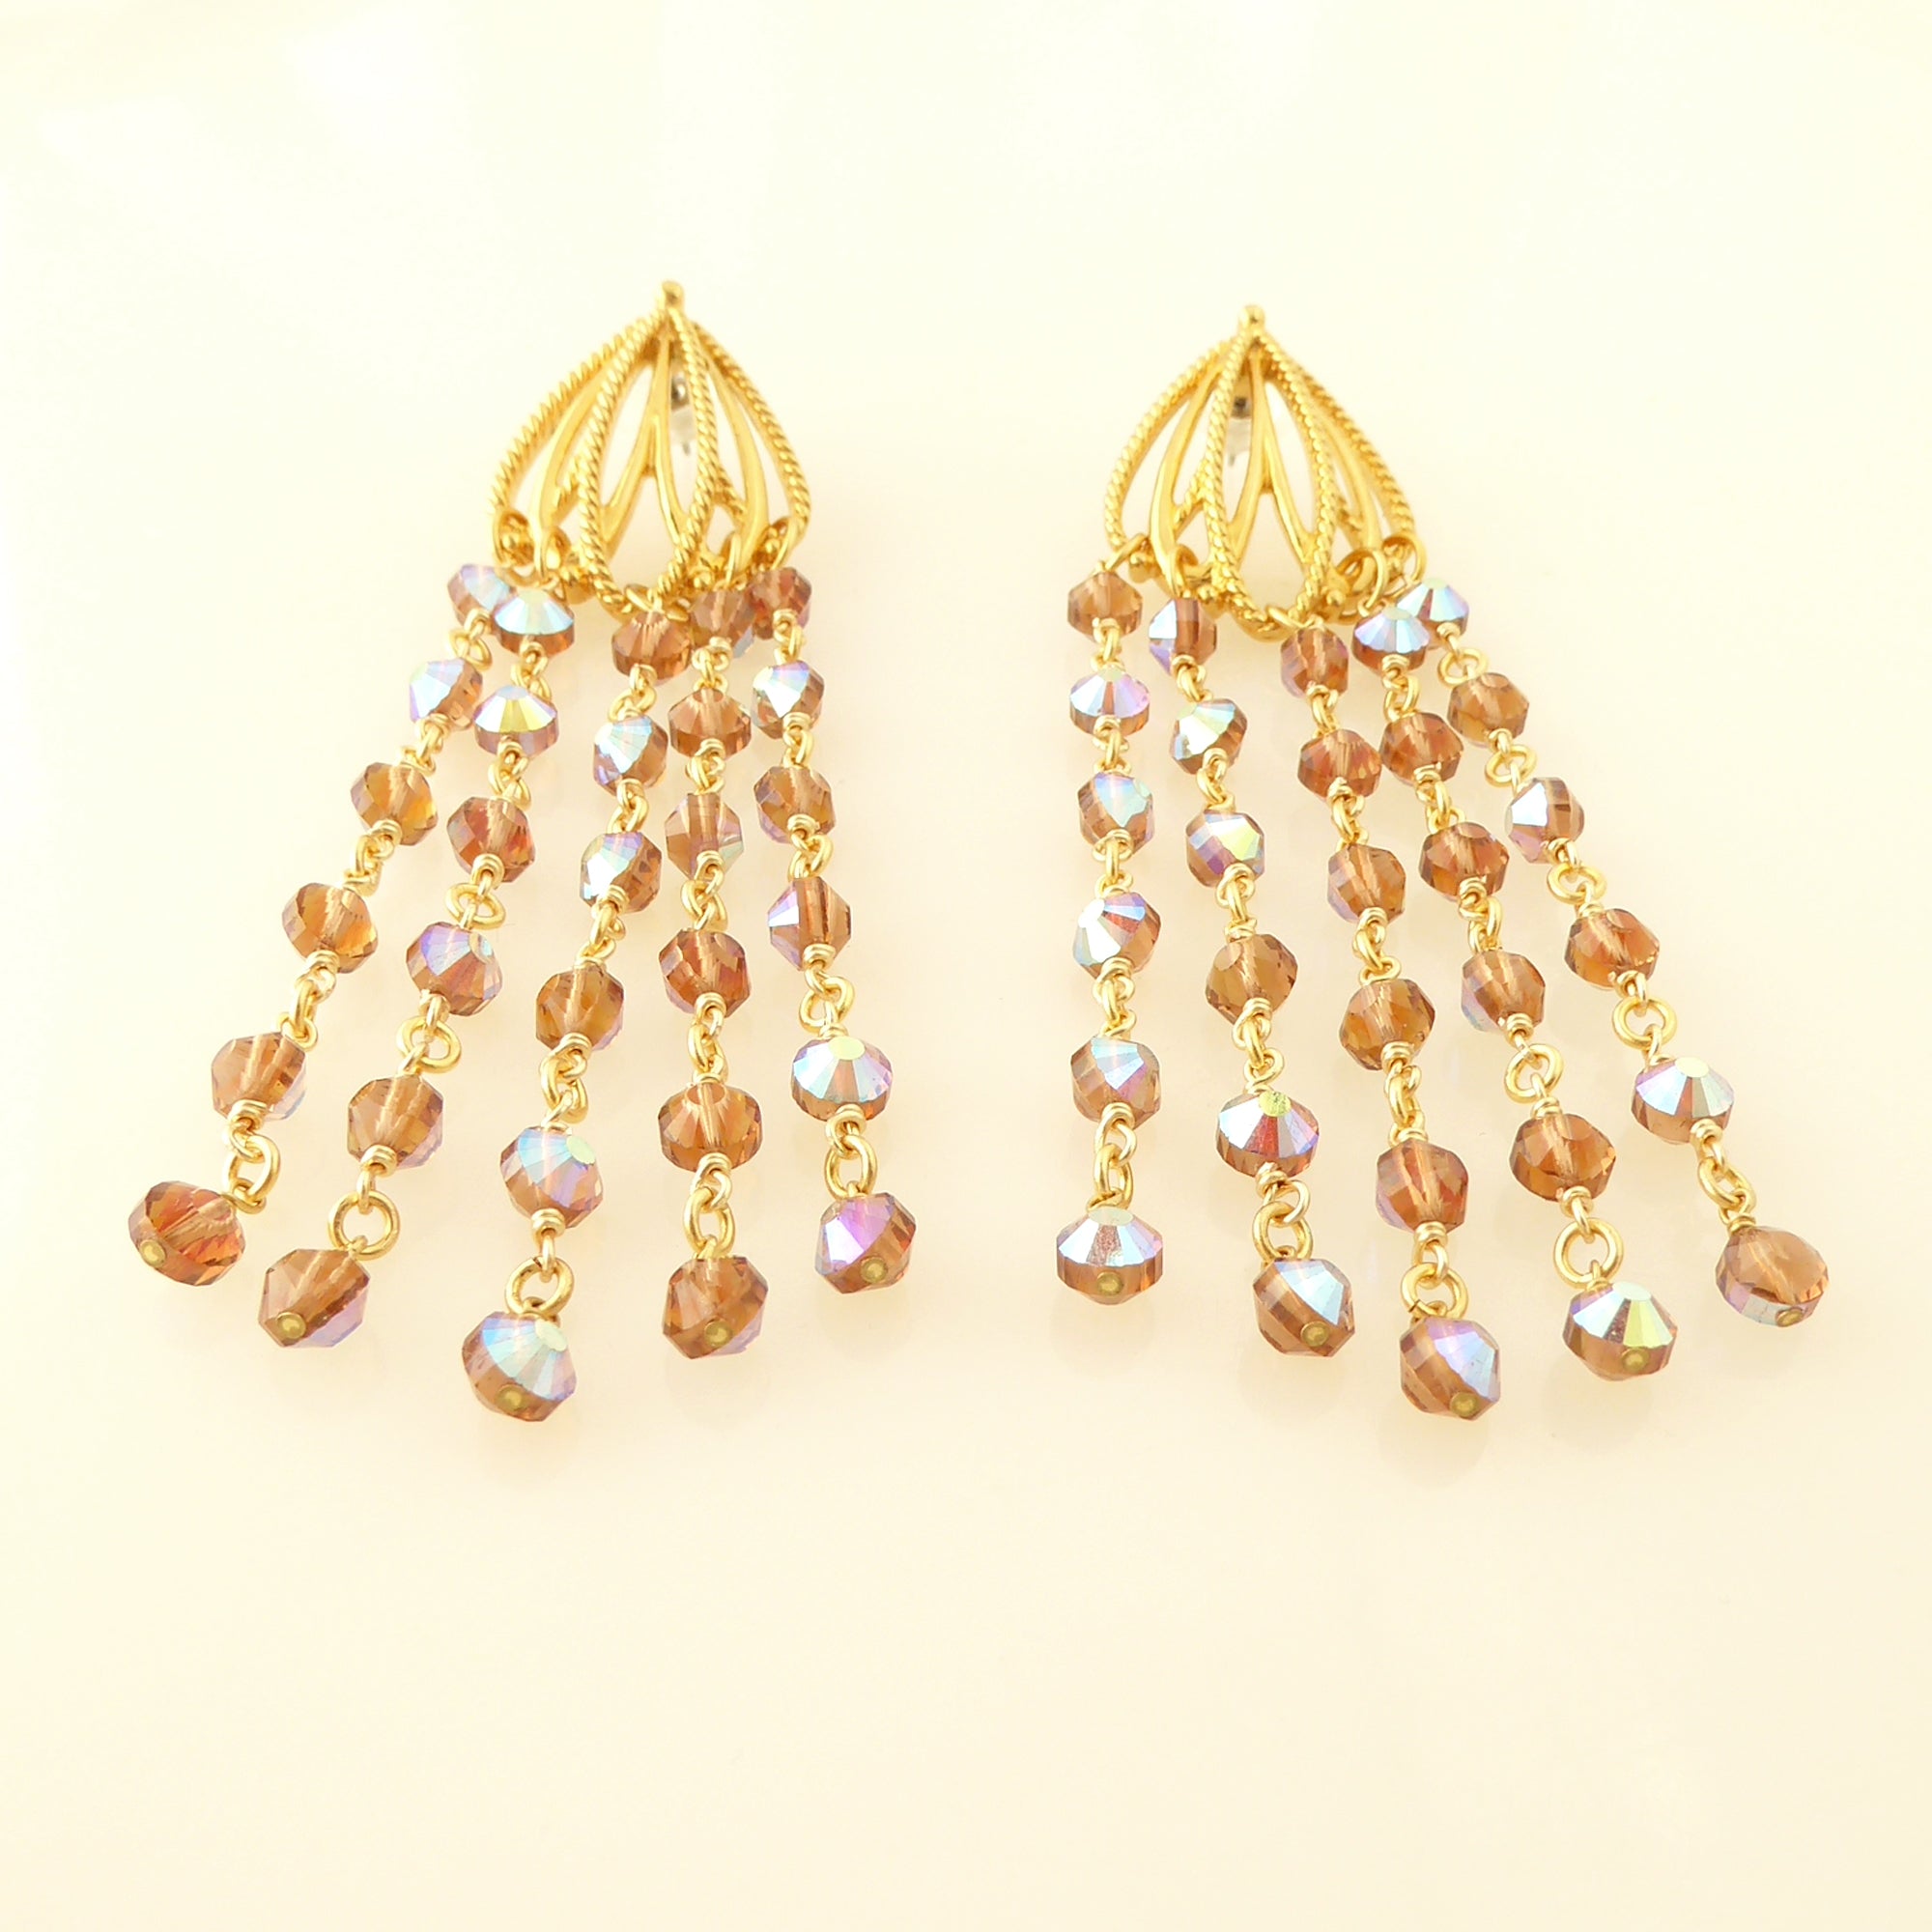 Iridescent topaz chandelier earrings by Jenny Dayco 3